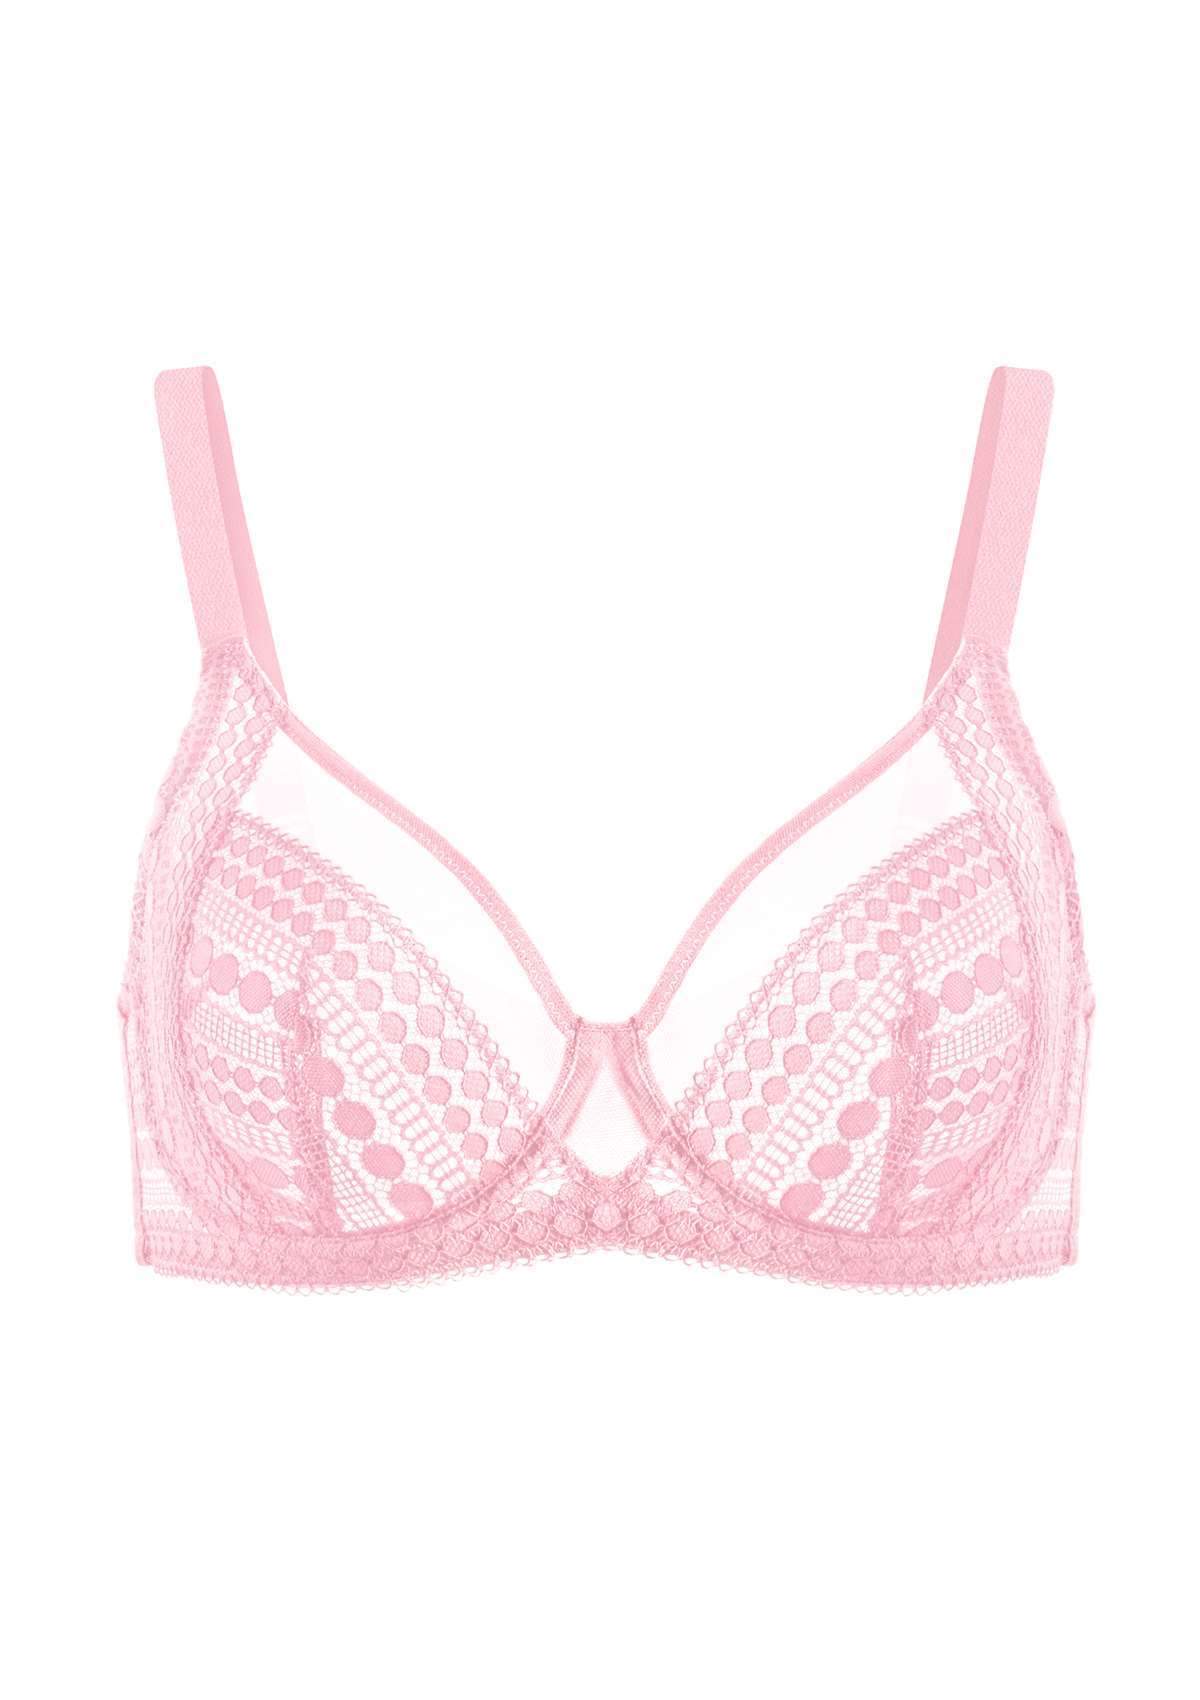 HSIA Heroine Lace Bra And Panties Set: Most Comfortable Supportive Bra - Pink / 34 / C